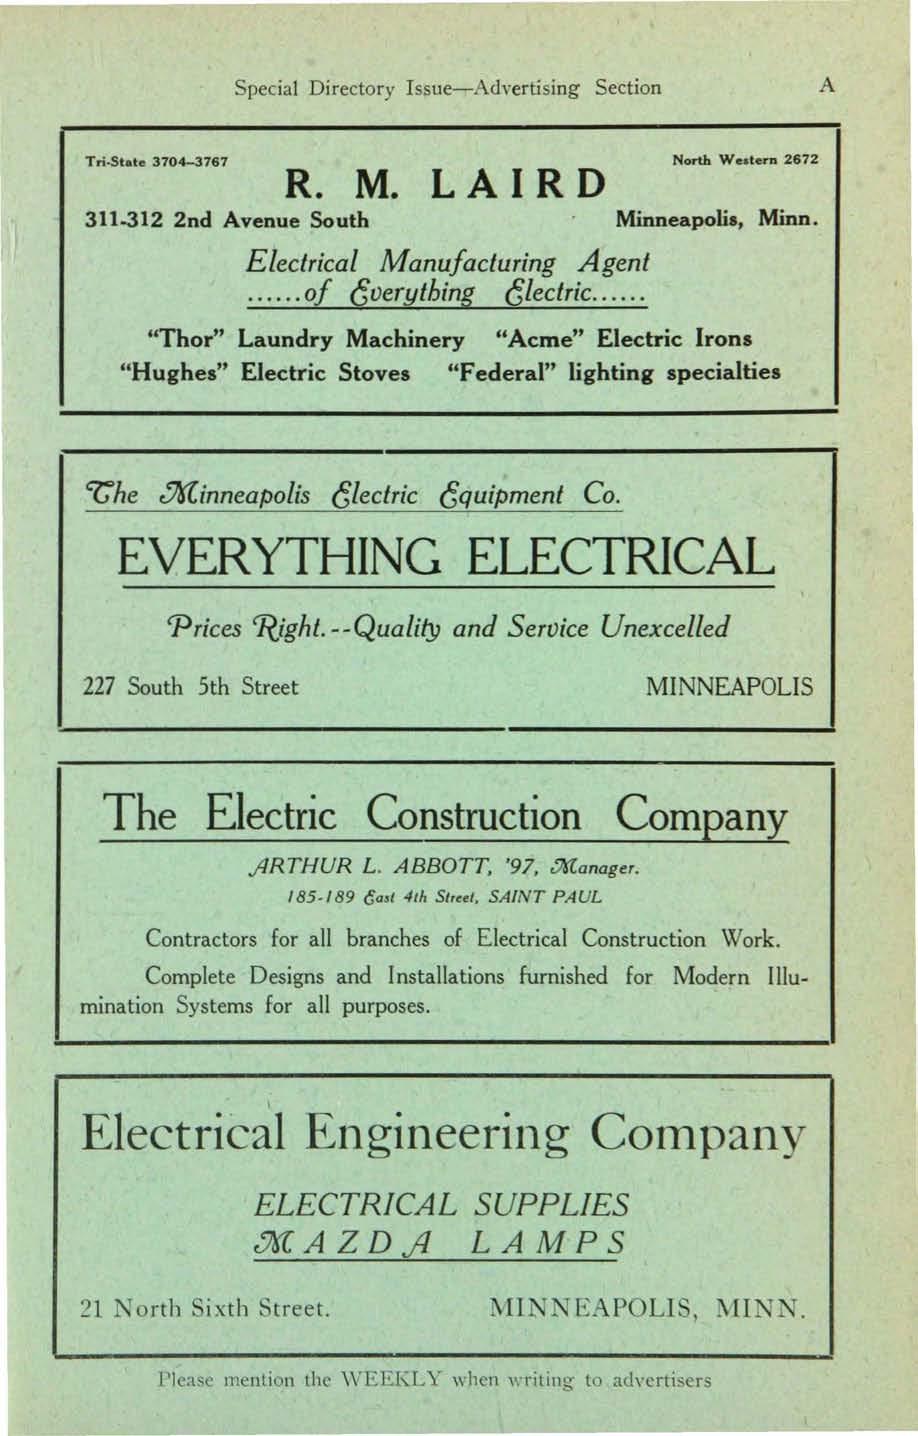 Special Directory Issue- Advertising Section A Tn-State 3704-3767 North We.terD 2672 R. M. L A I R D 311-312 2nd Avenue South Minneapolis, Minn. Electrical Manufacturing Agent... of everything electric.